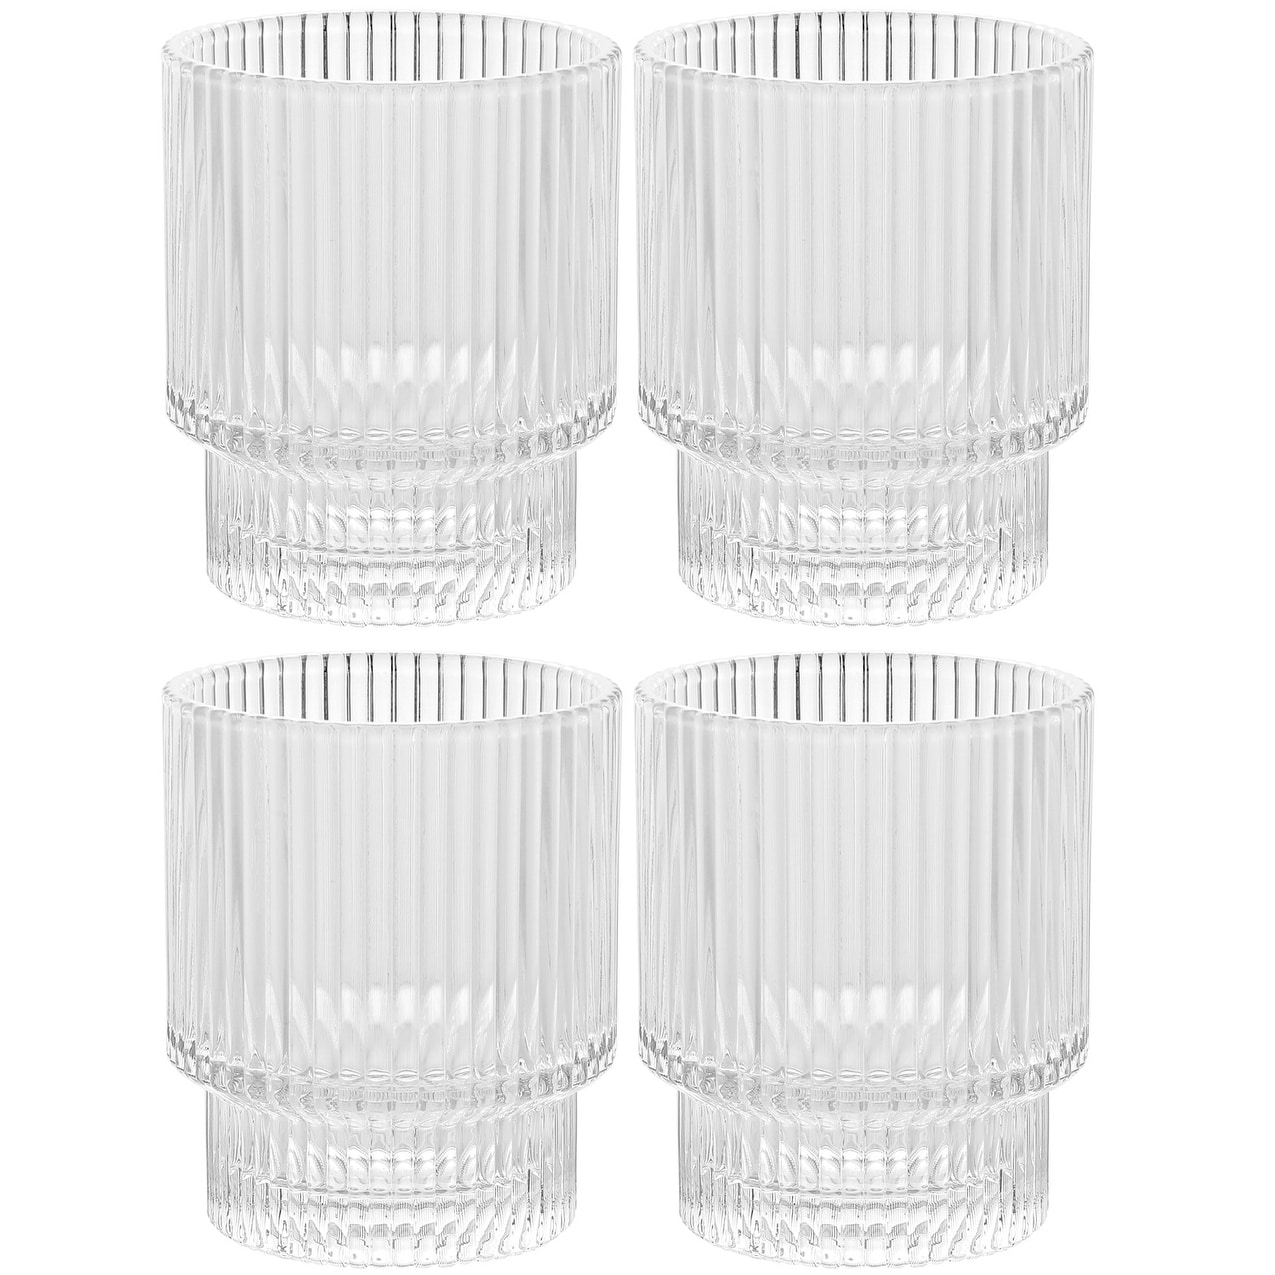 Elle Decor Set of 4 Water Drinking Glasses, 12 oz Whiskey Tumblers, Clear Glass Cups with Heavy Weighted Colored Base, Amber Base